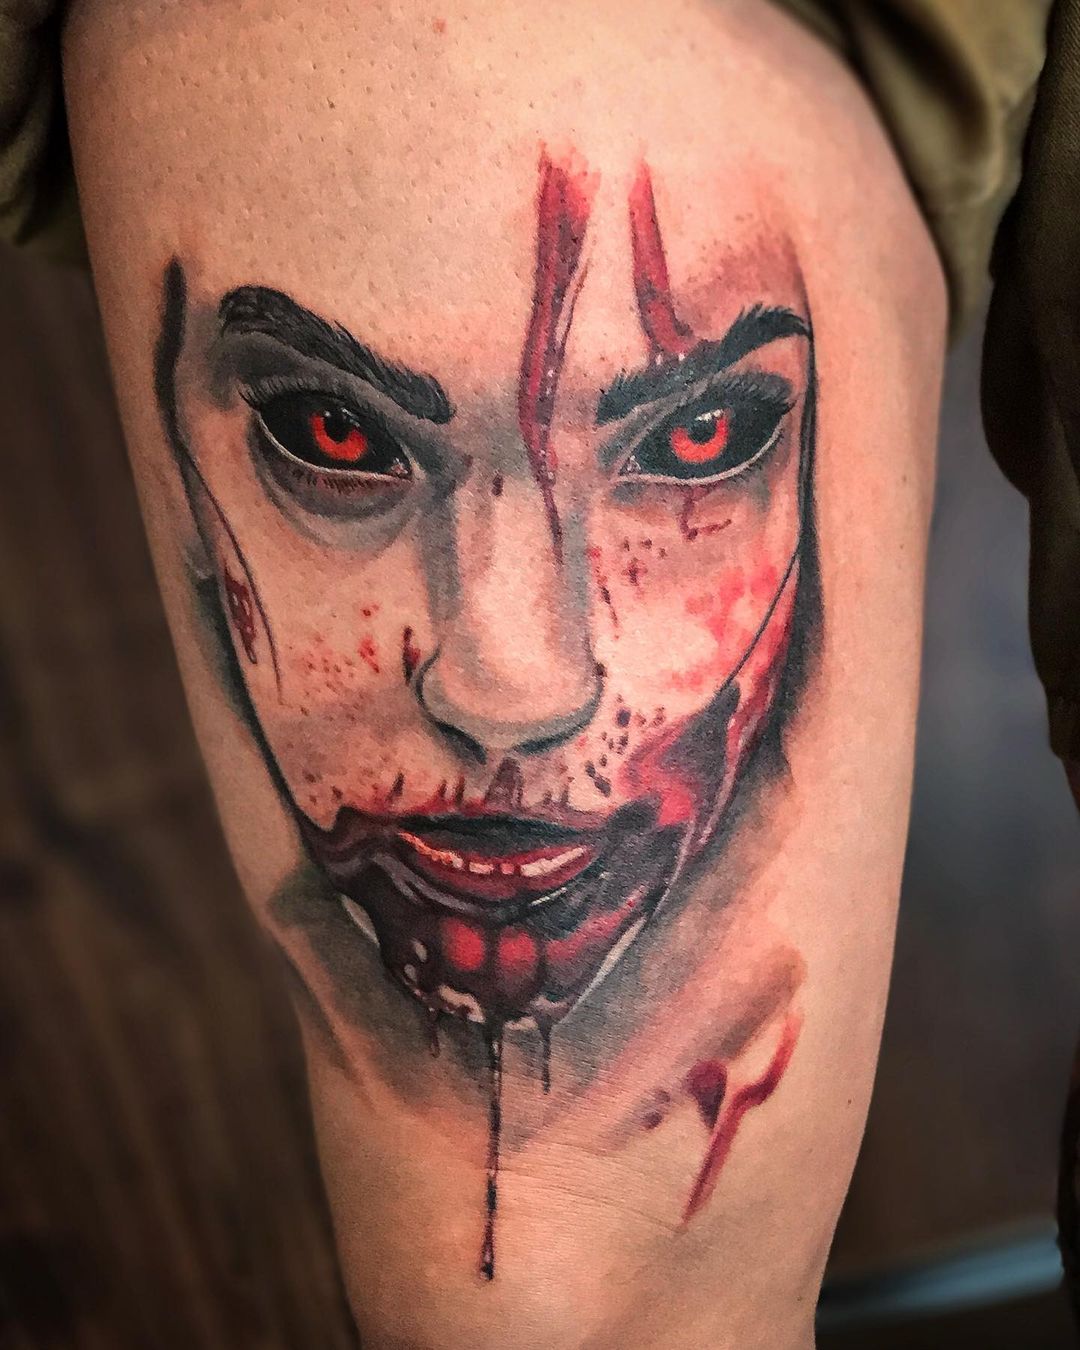 Halloween is coming nearer, here‘s some bloody stuff...
.
.
.

#tattoo #tattooin...